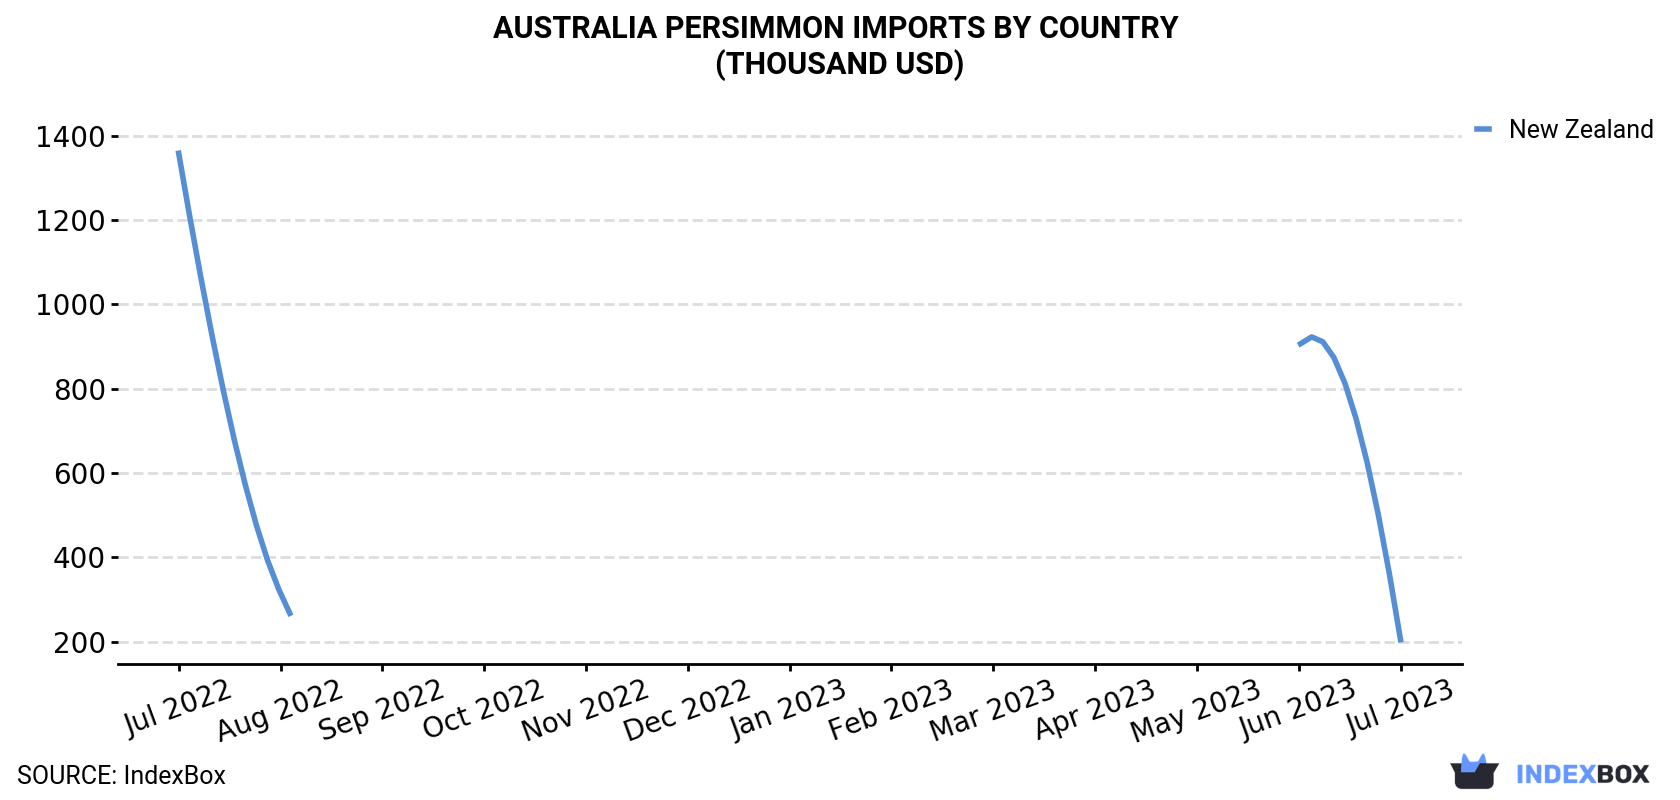 Australia Persimmon Imports By Country (Thousand USD)